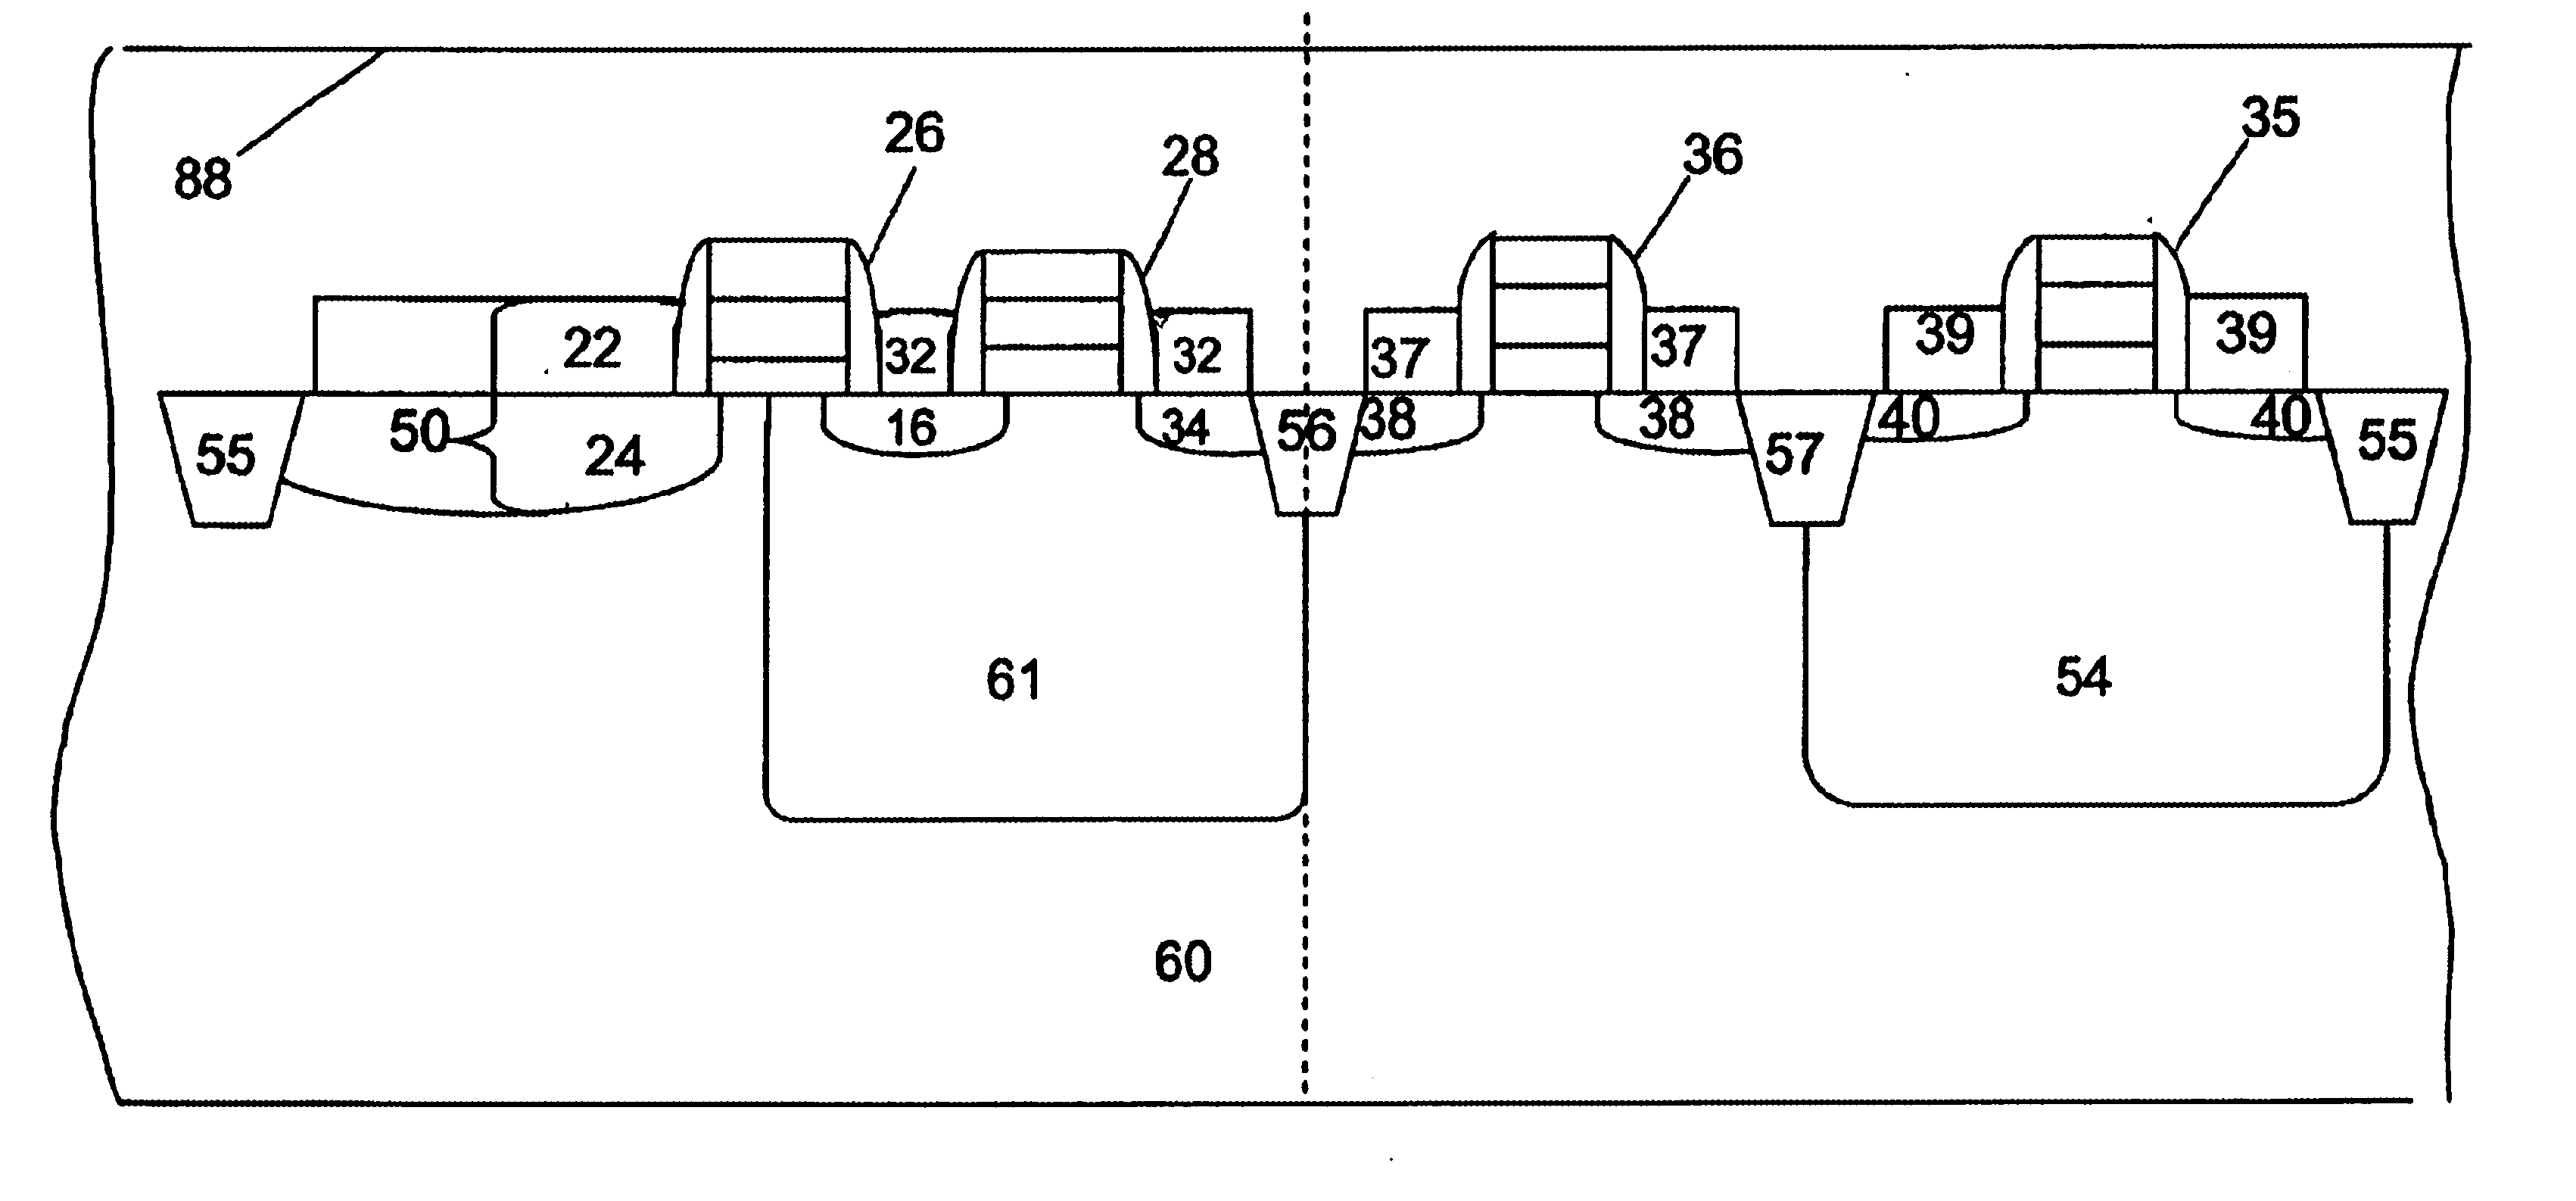 Elevated photodiode in an image sensor